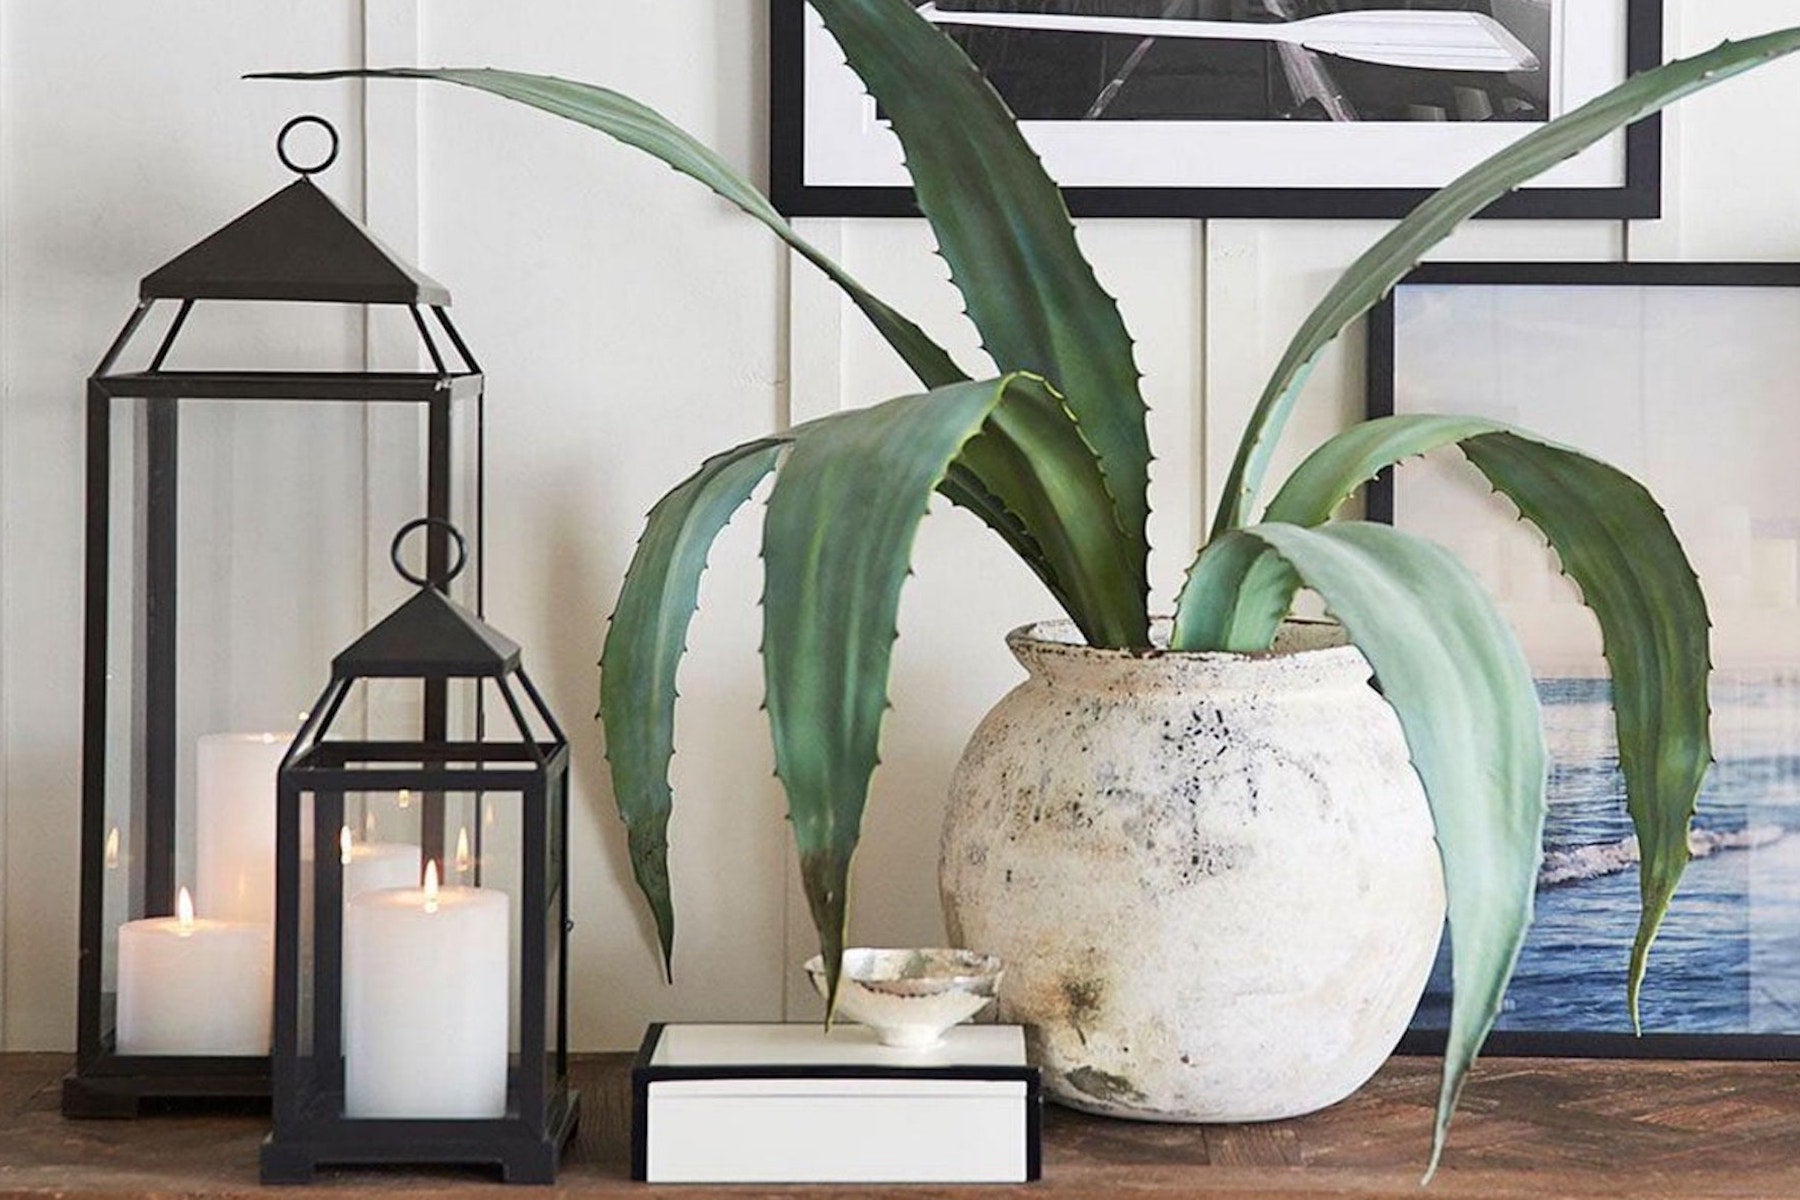 How to Style Spaces with Lanterns